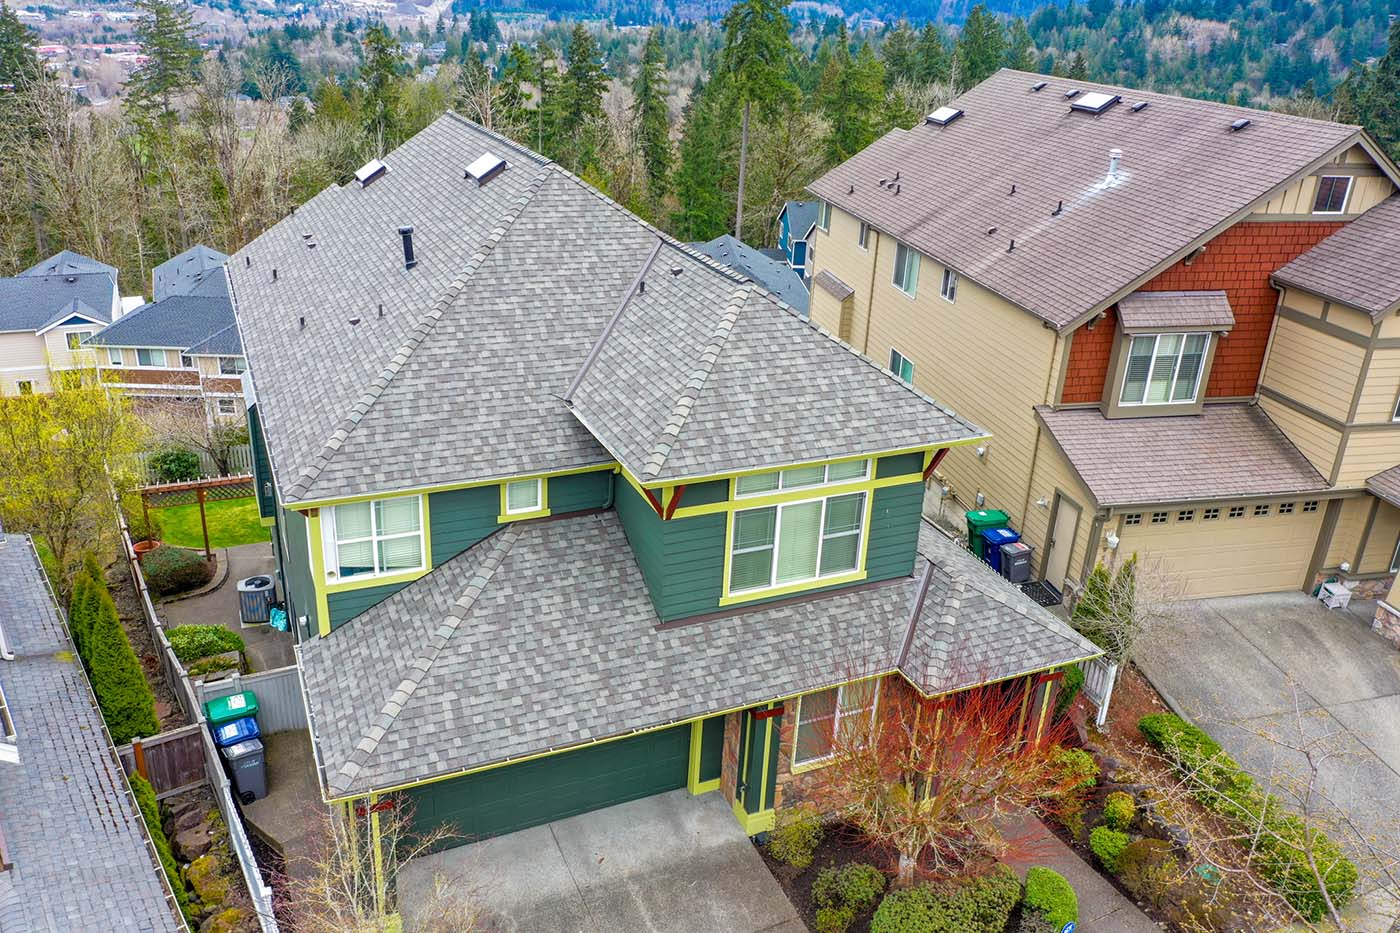 New Composite Asphalt Shingles Roof in Issaquah, Washington - view of front of house and roof